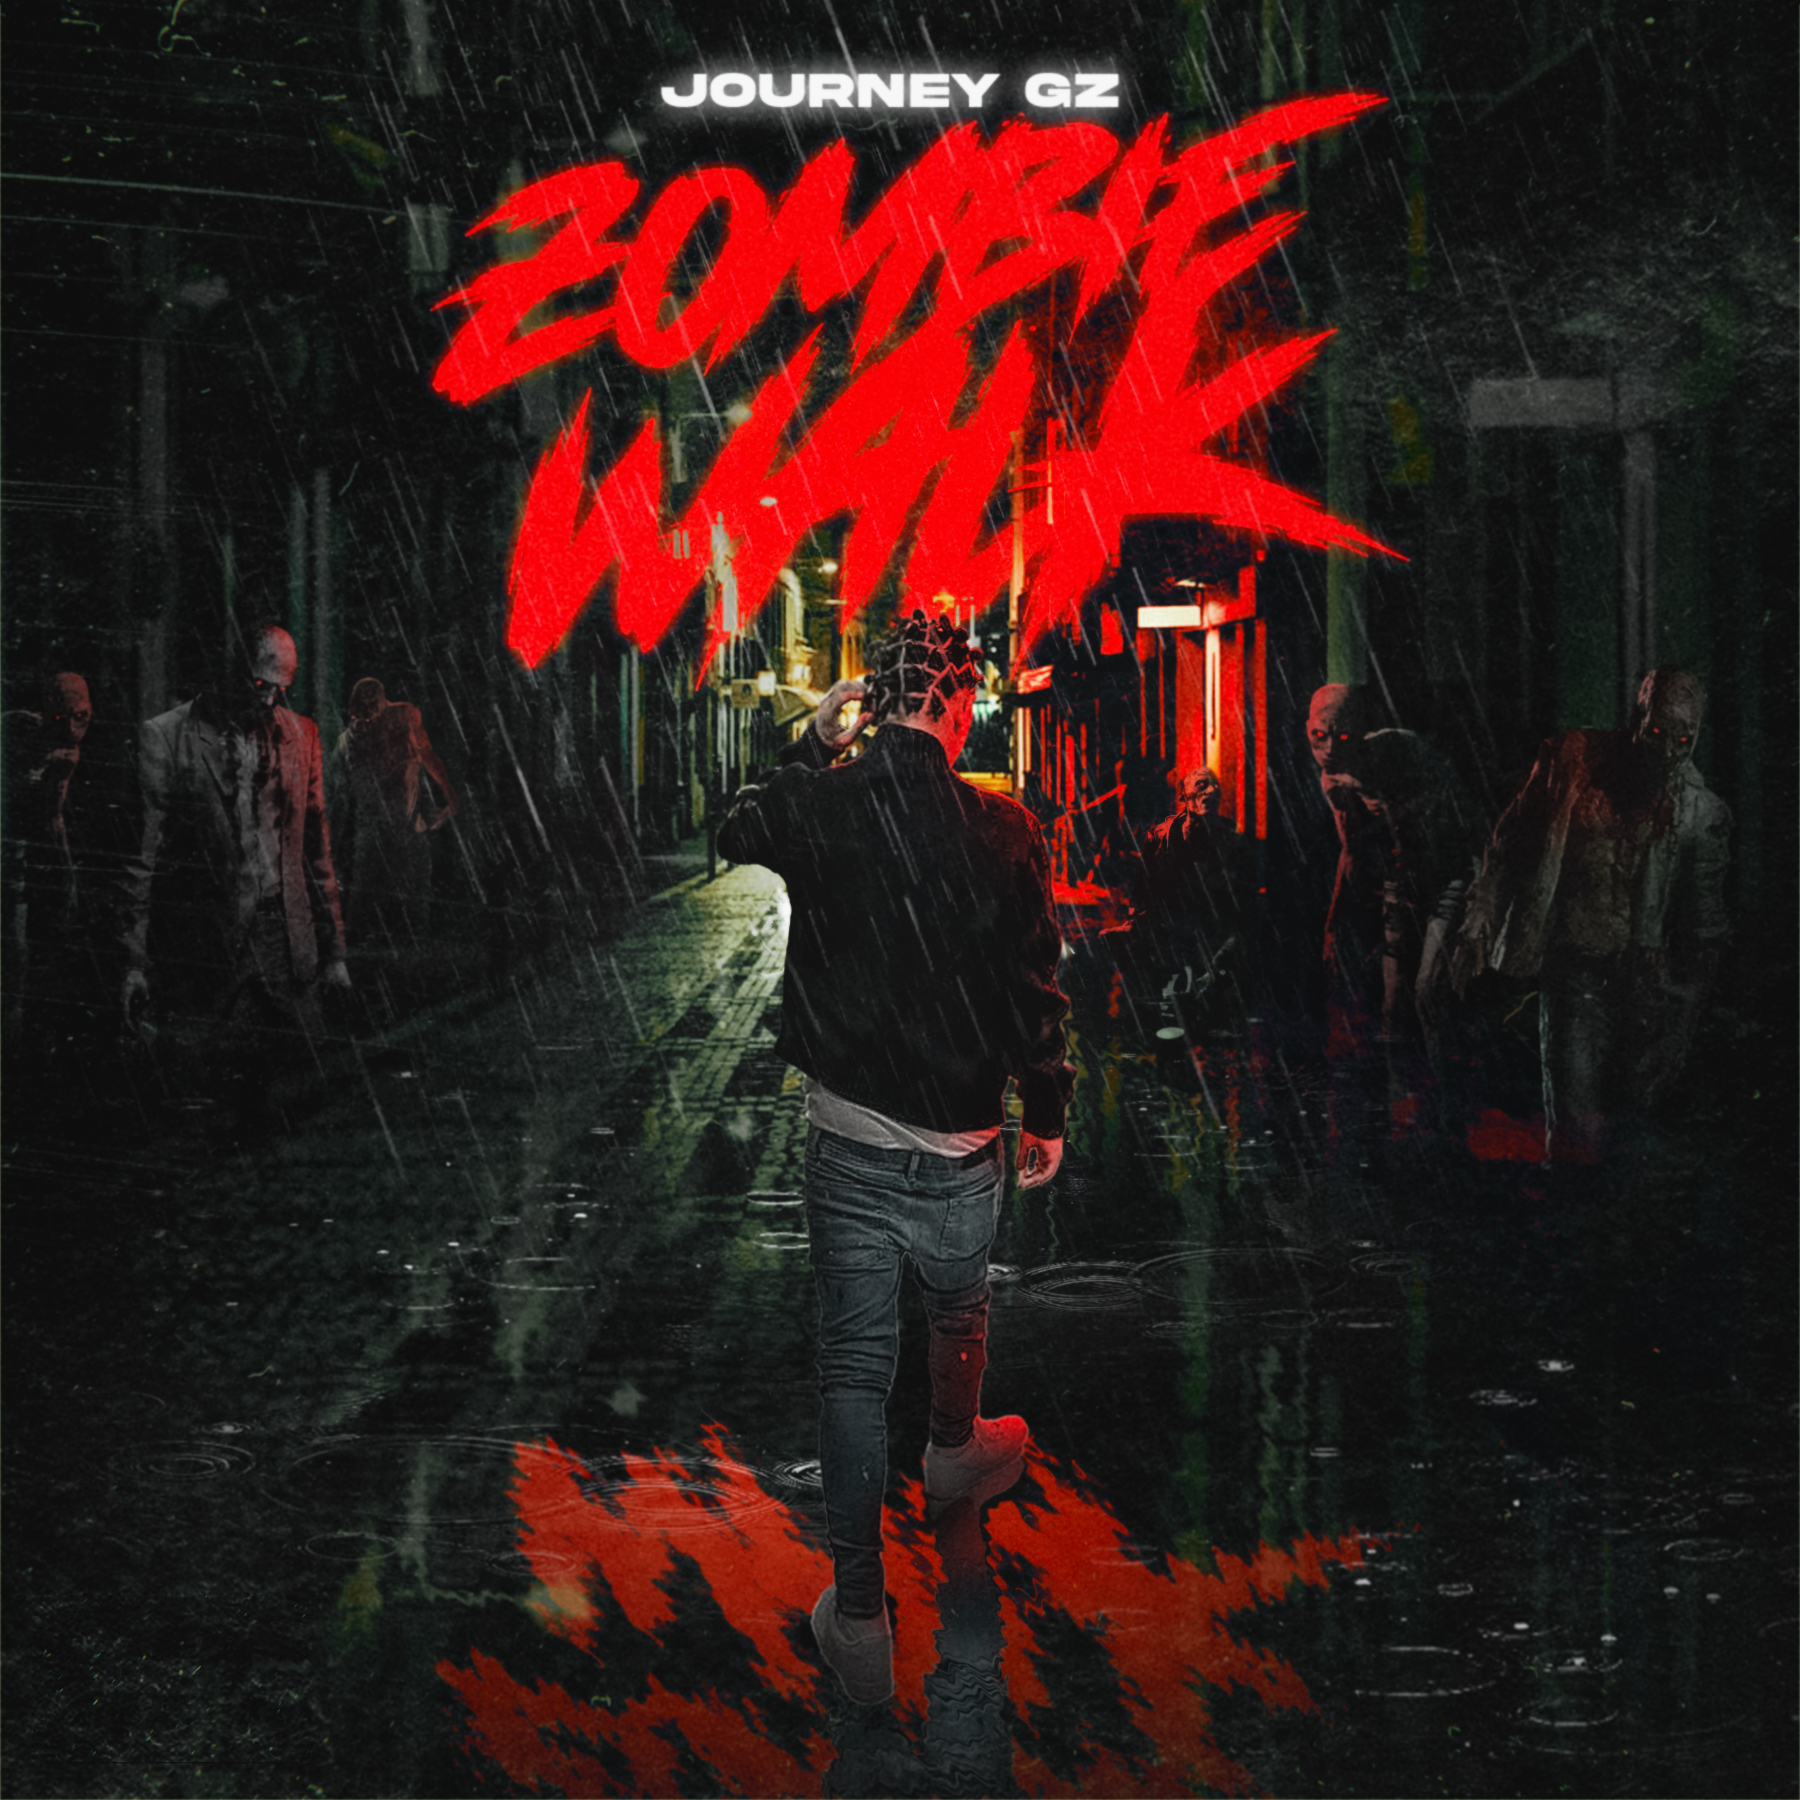 Journey Gz Released New Visual for Zombie Walk